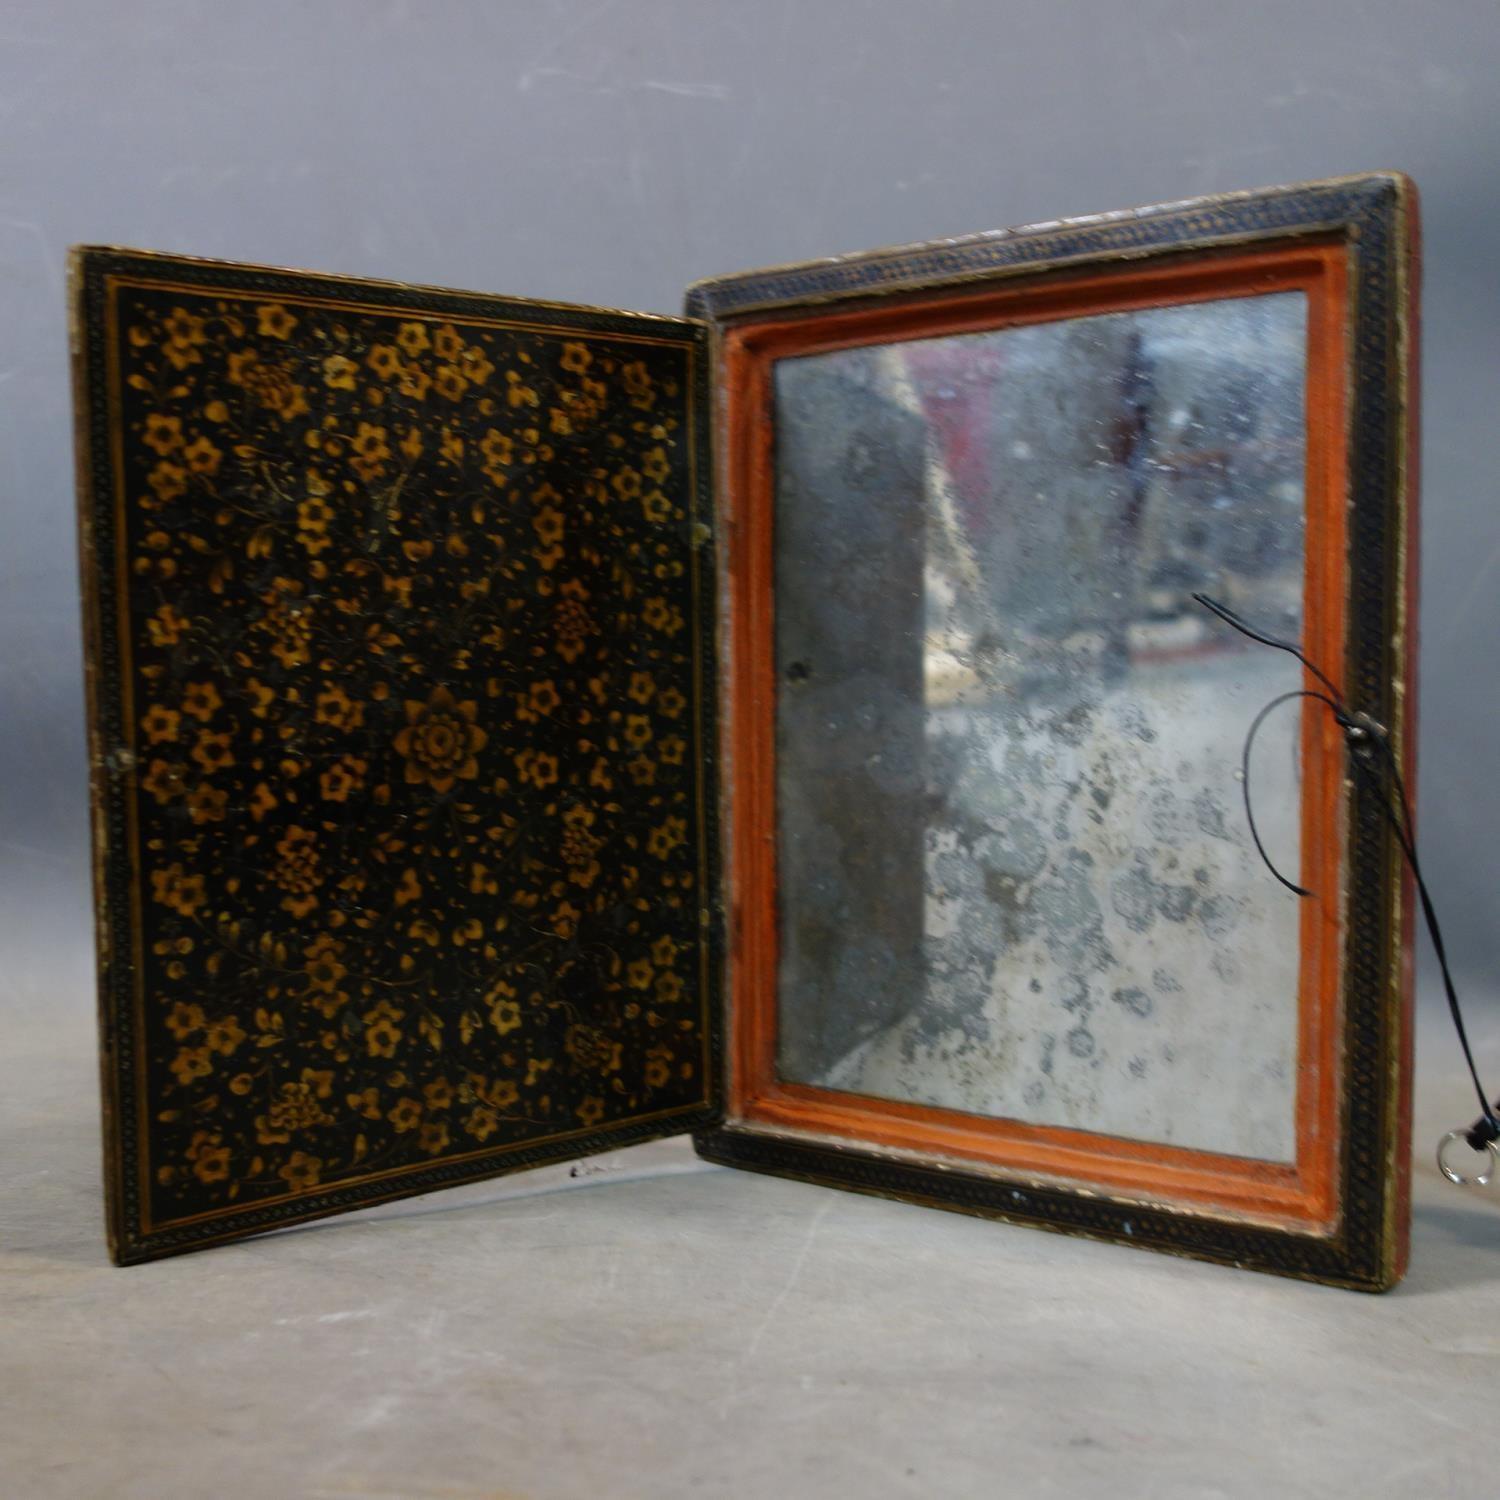 A hand painted Persian mirror case, papier-mâché, gilded lacquered with original mirror inside, 18th